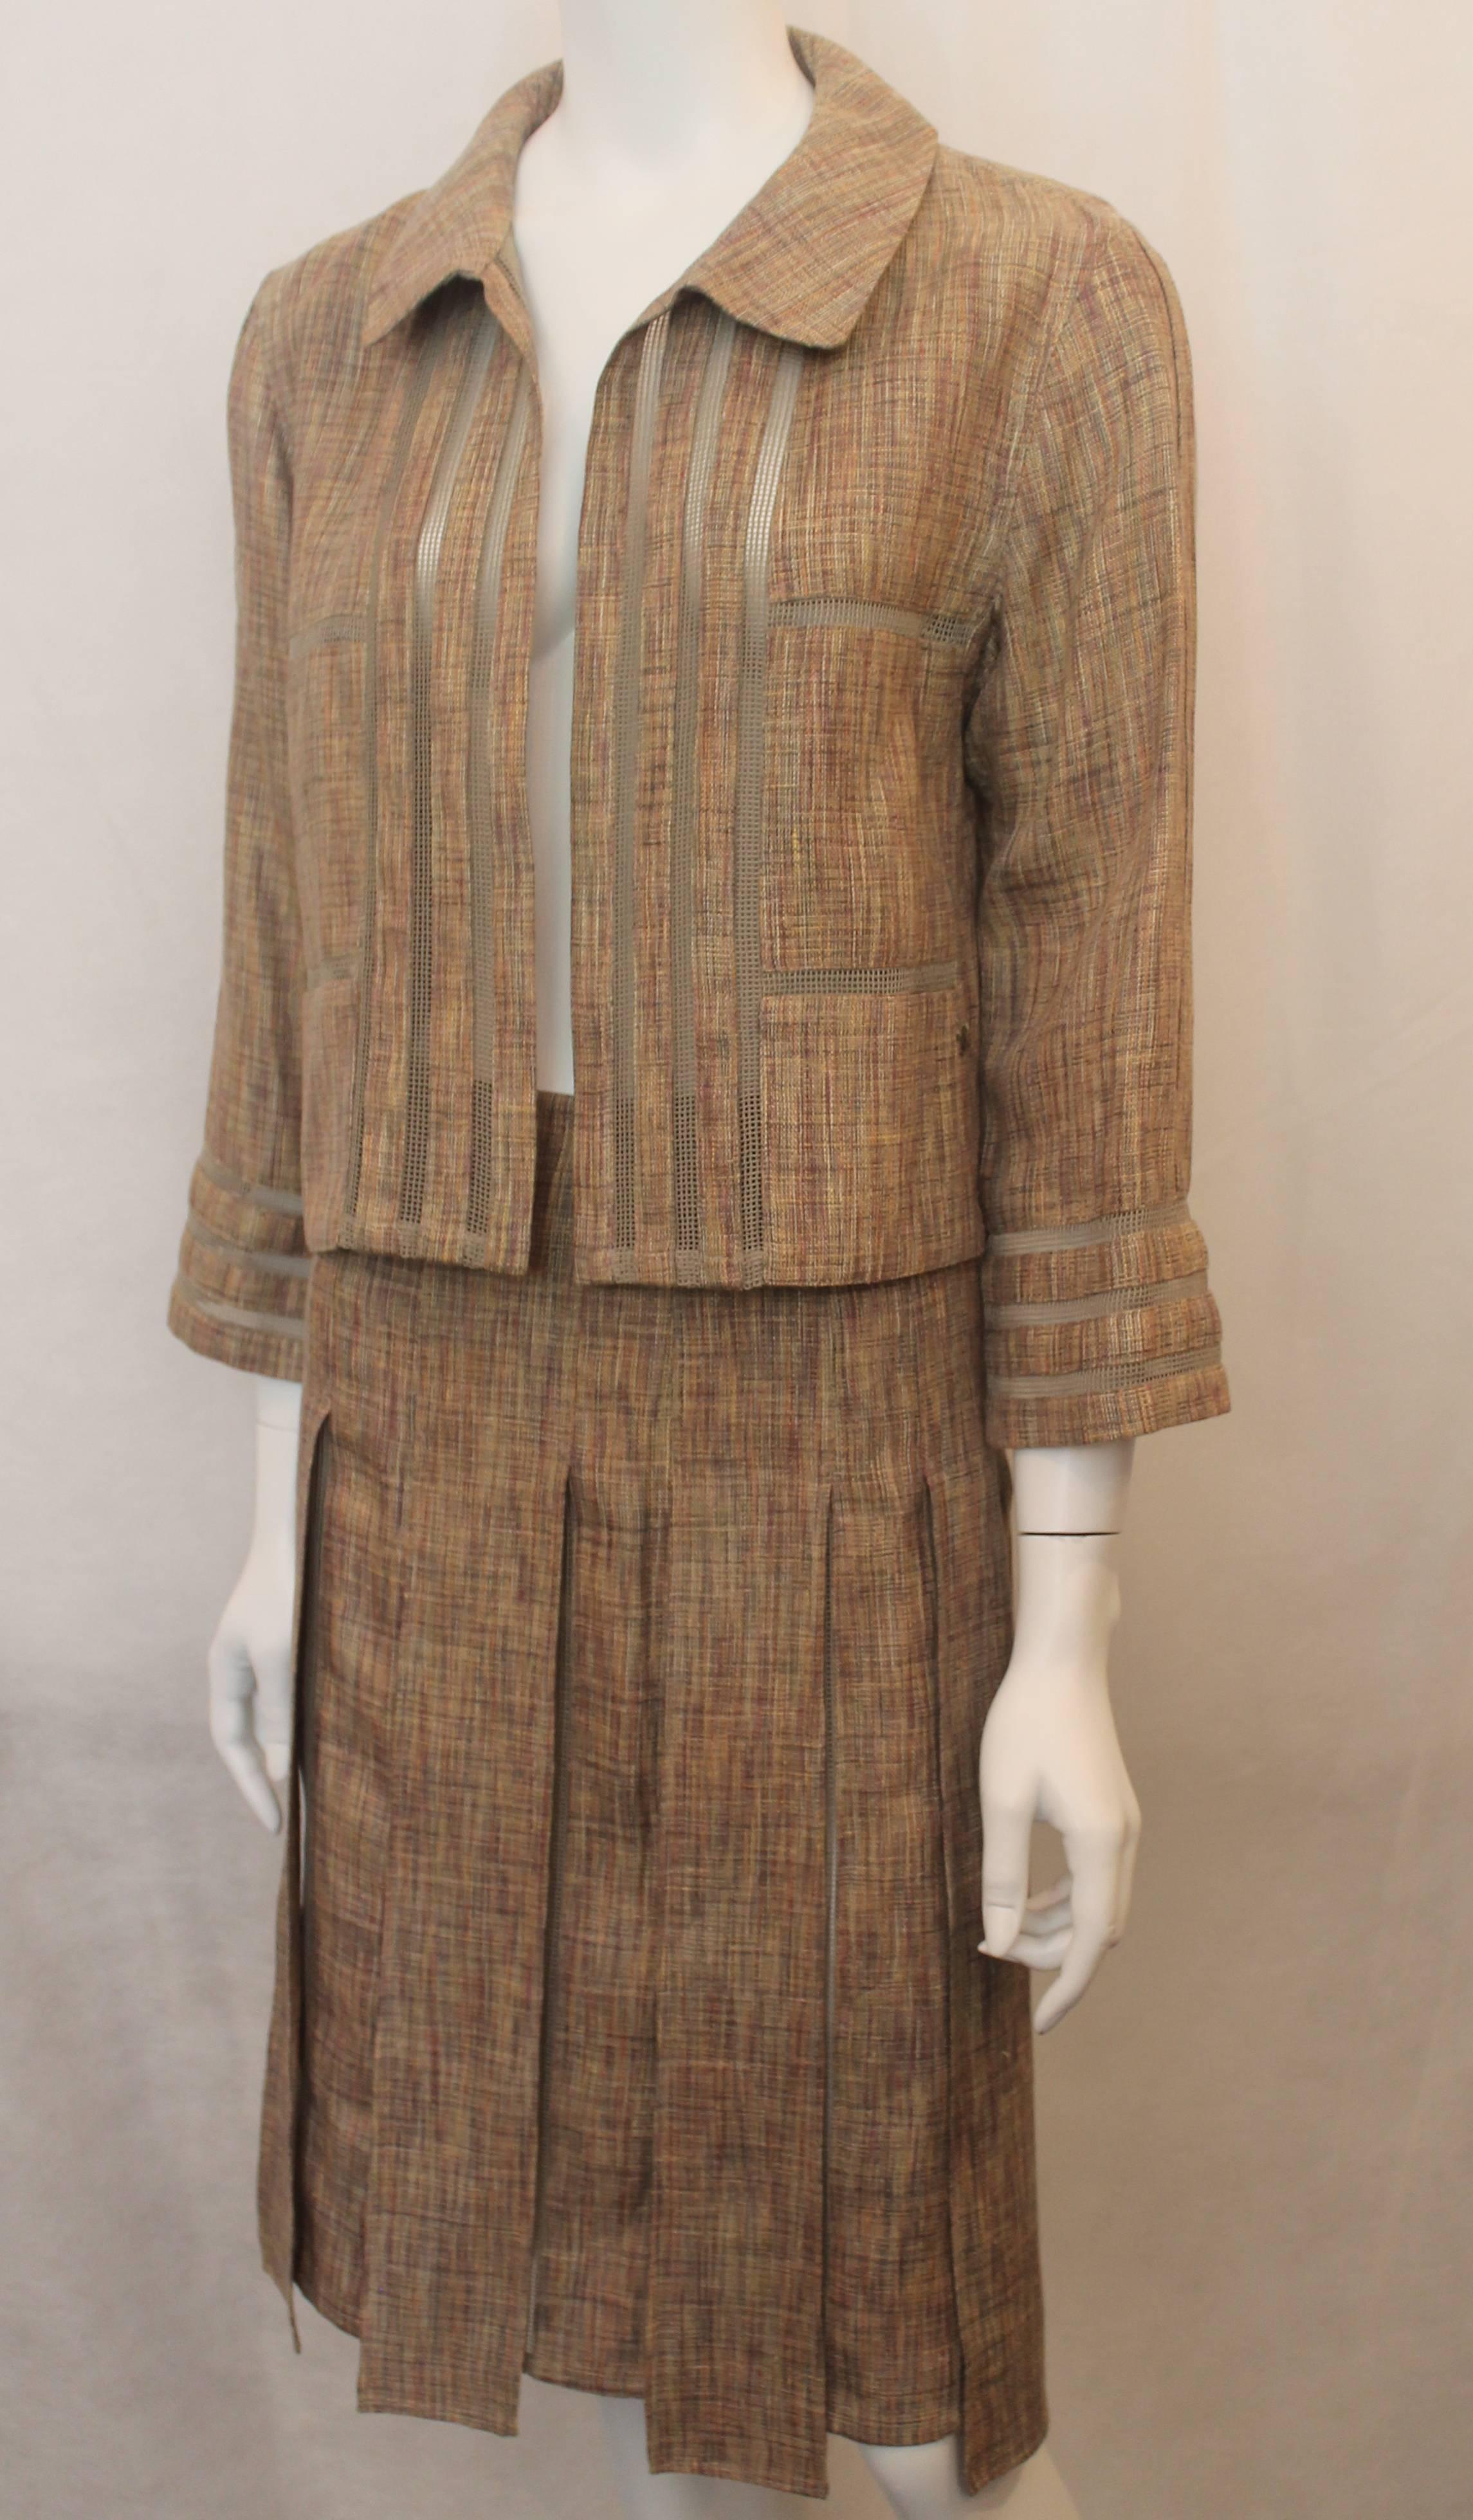 Chanel Earthtone Linen Blend Skirt Suit with Mesh Detail - 38 - 99P. This set is in excellent condition and has a very unique look. The fabric is a mixture of tan, pink, olive, and grey stitched fabric with mesh olive stripes. The collared jacket